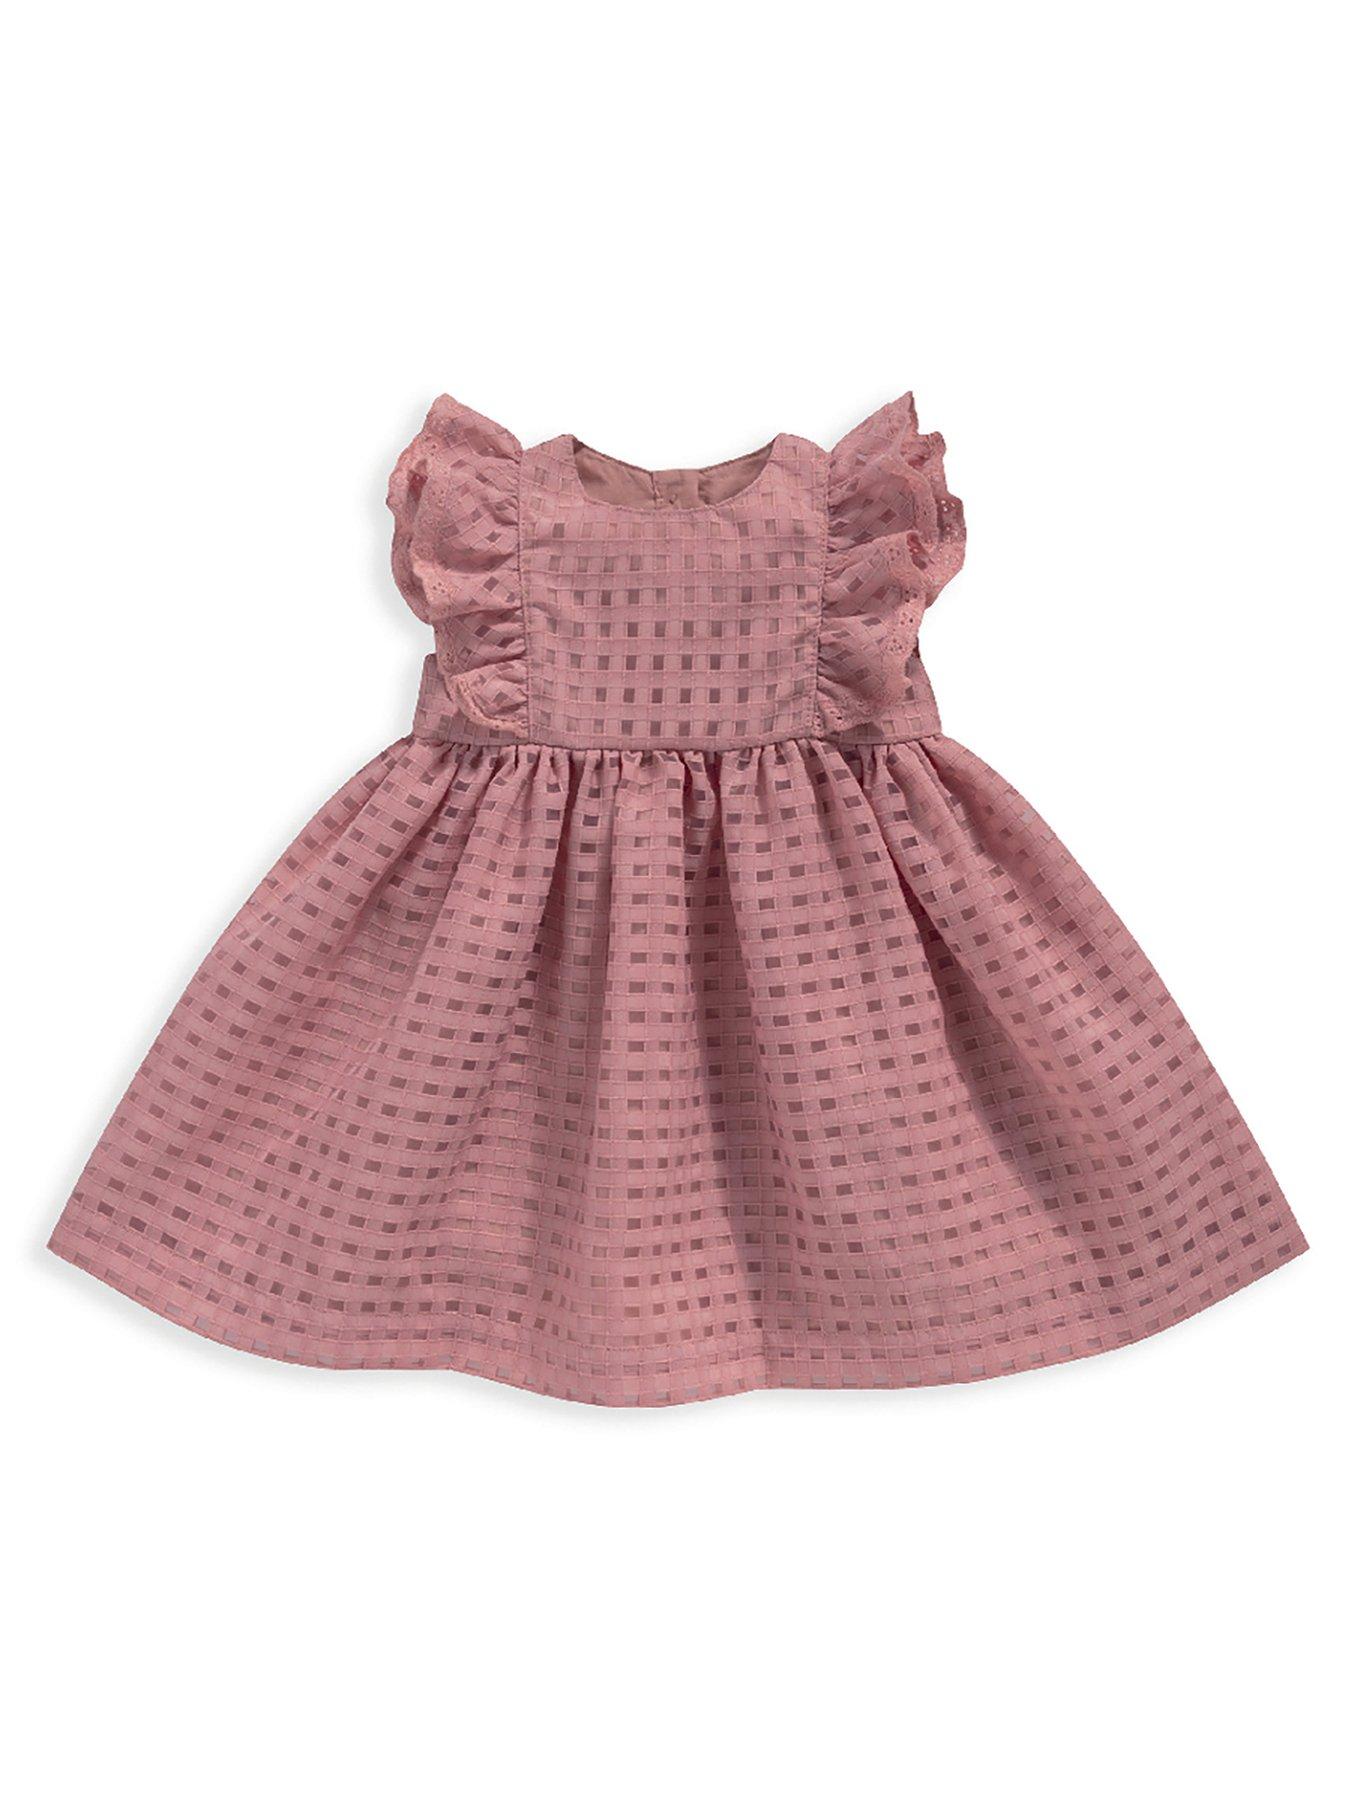 Mamas & Papas Baby Girls Textured All-in-one with Bow Romper